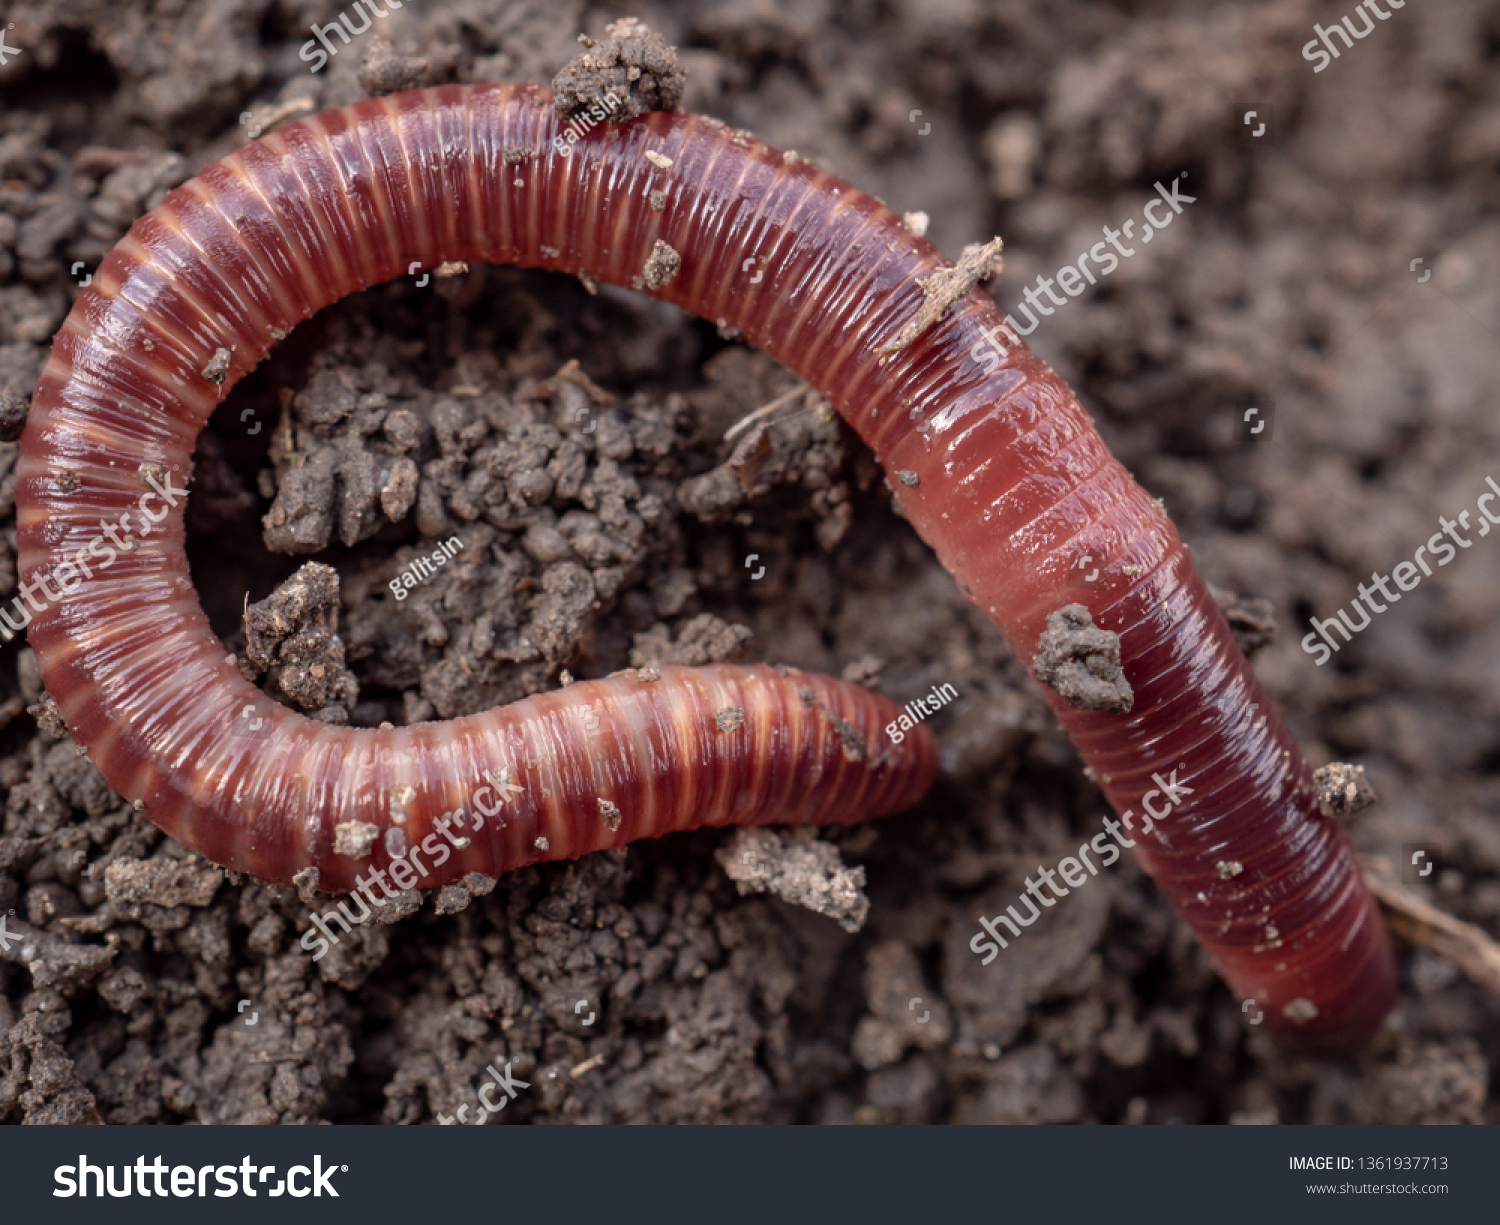 Earthworms in black soil of greenhouse. Macro Brandling, panfish, trout, tiger, red wiggler, Eisenia fetida.
Garden compost and worms recycling plant waste into rich soil improver and fertilizer #1361937713